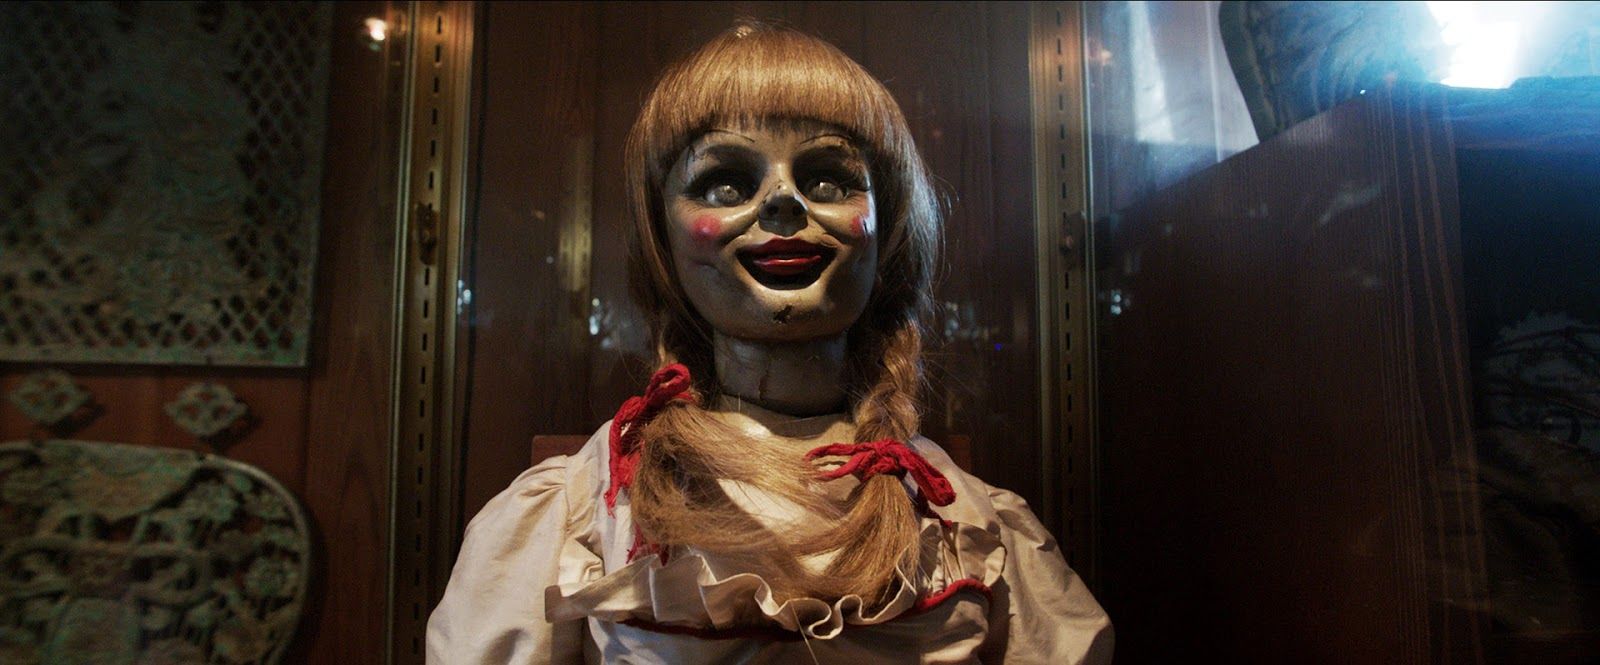 Annabelle doll in The Conjuring